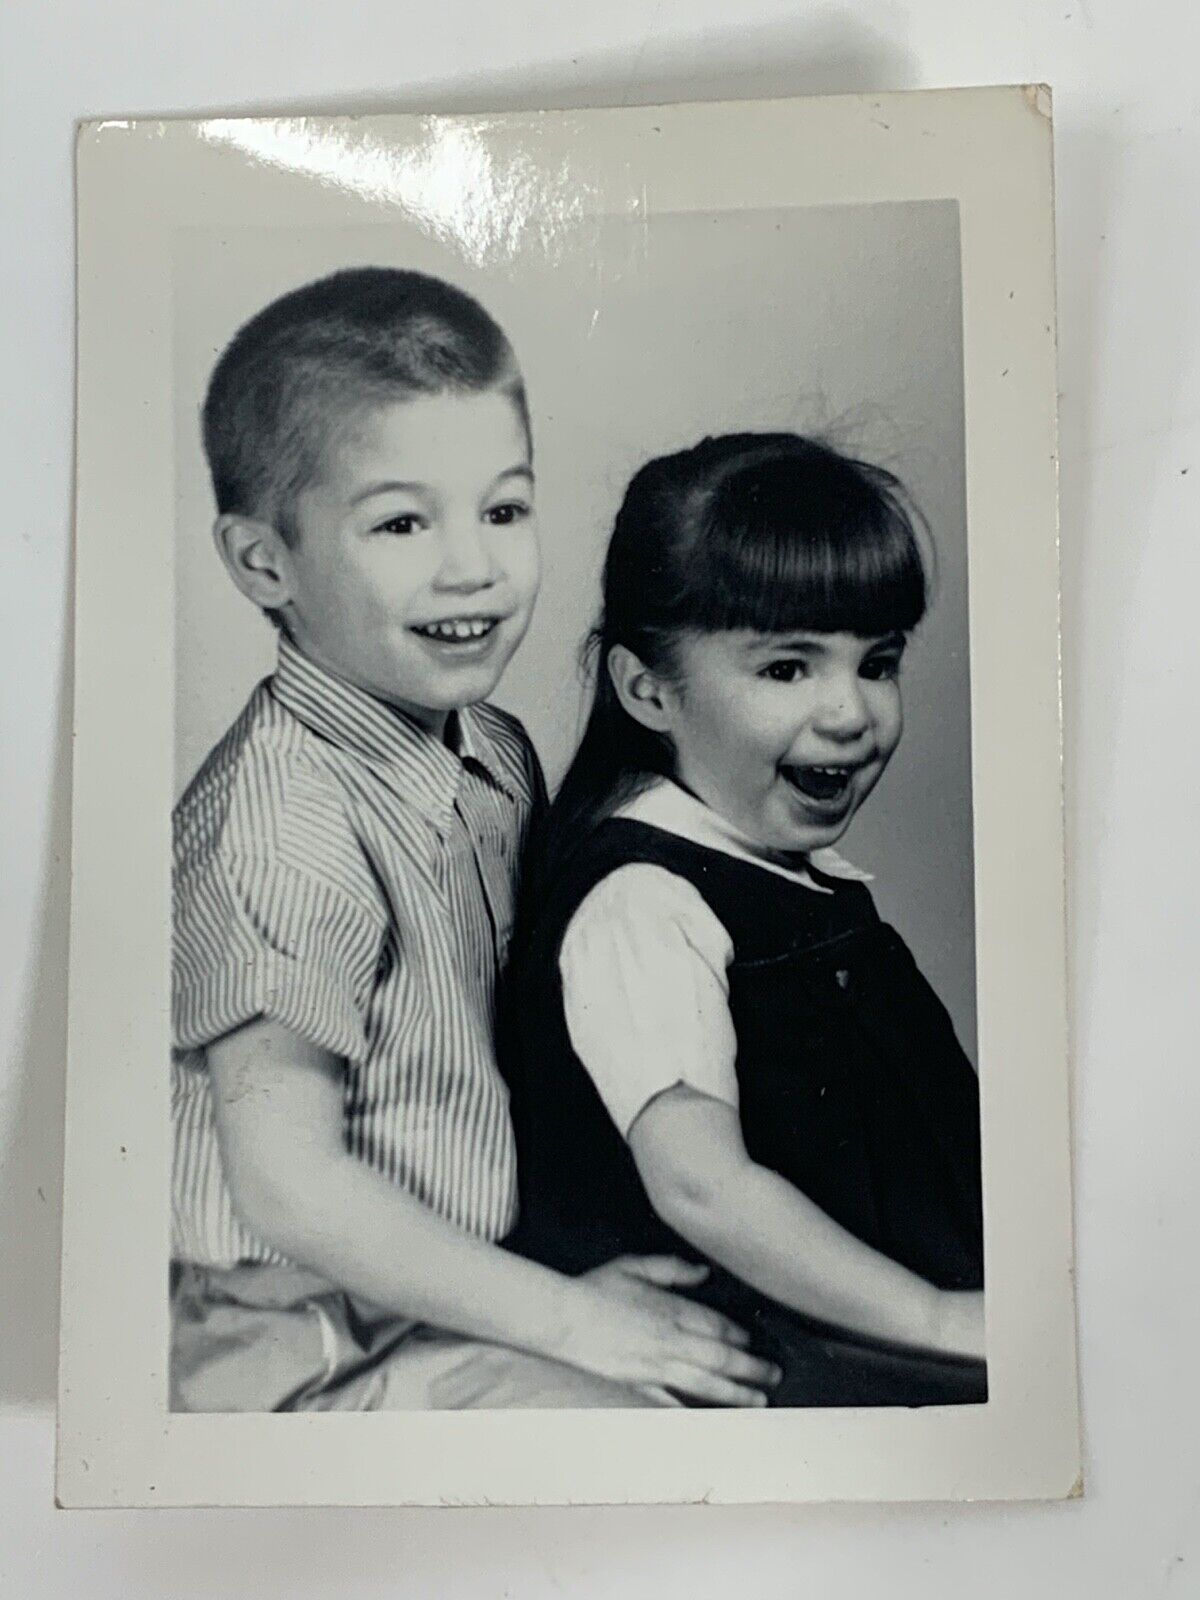 (AdA) FOUND PHOTO Photograph Snapshot VTG Kids Brother Sister Happy Smiling